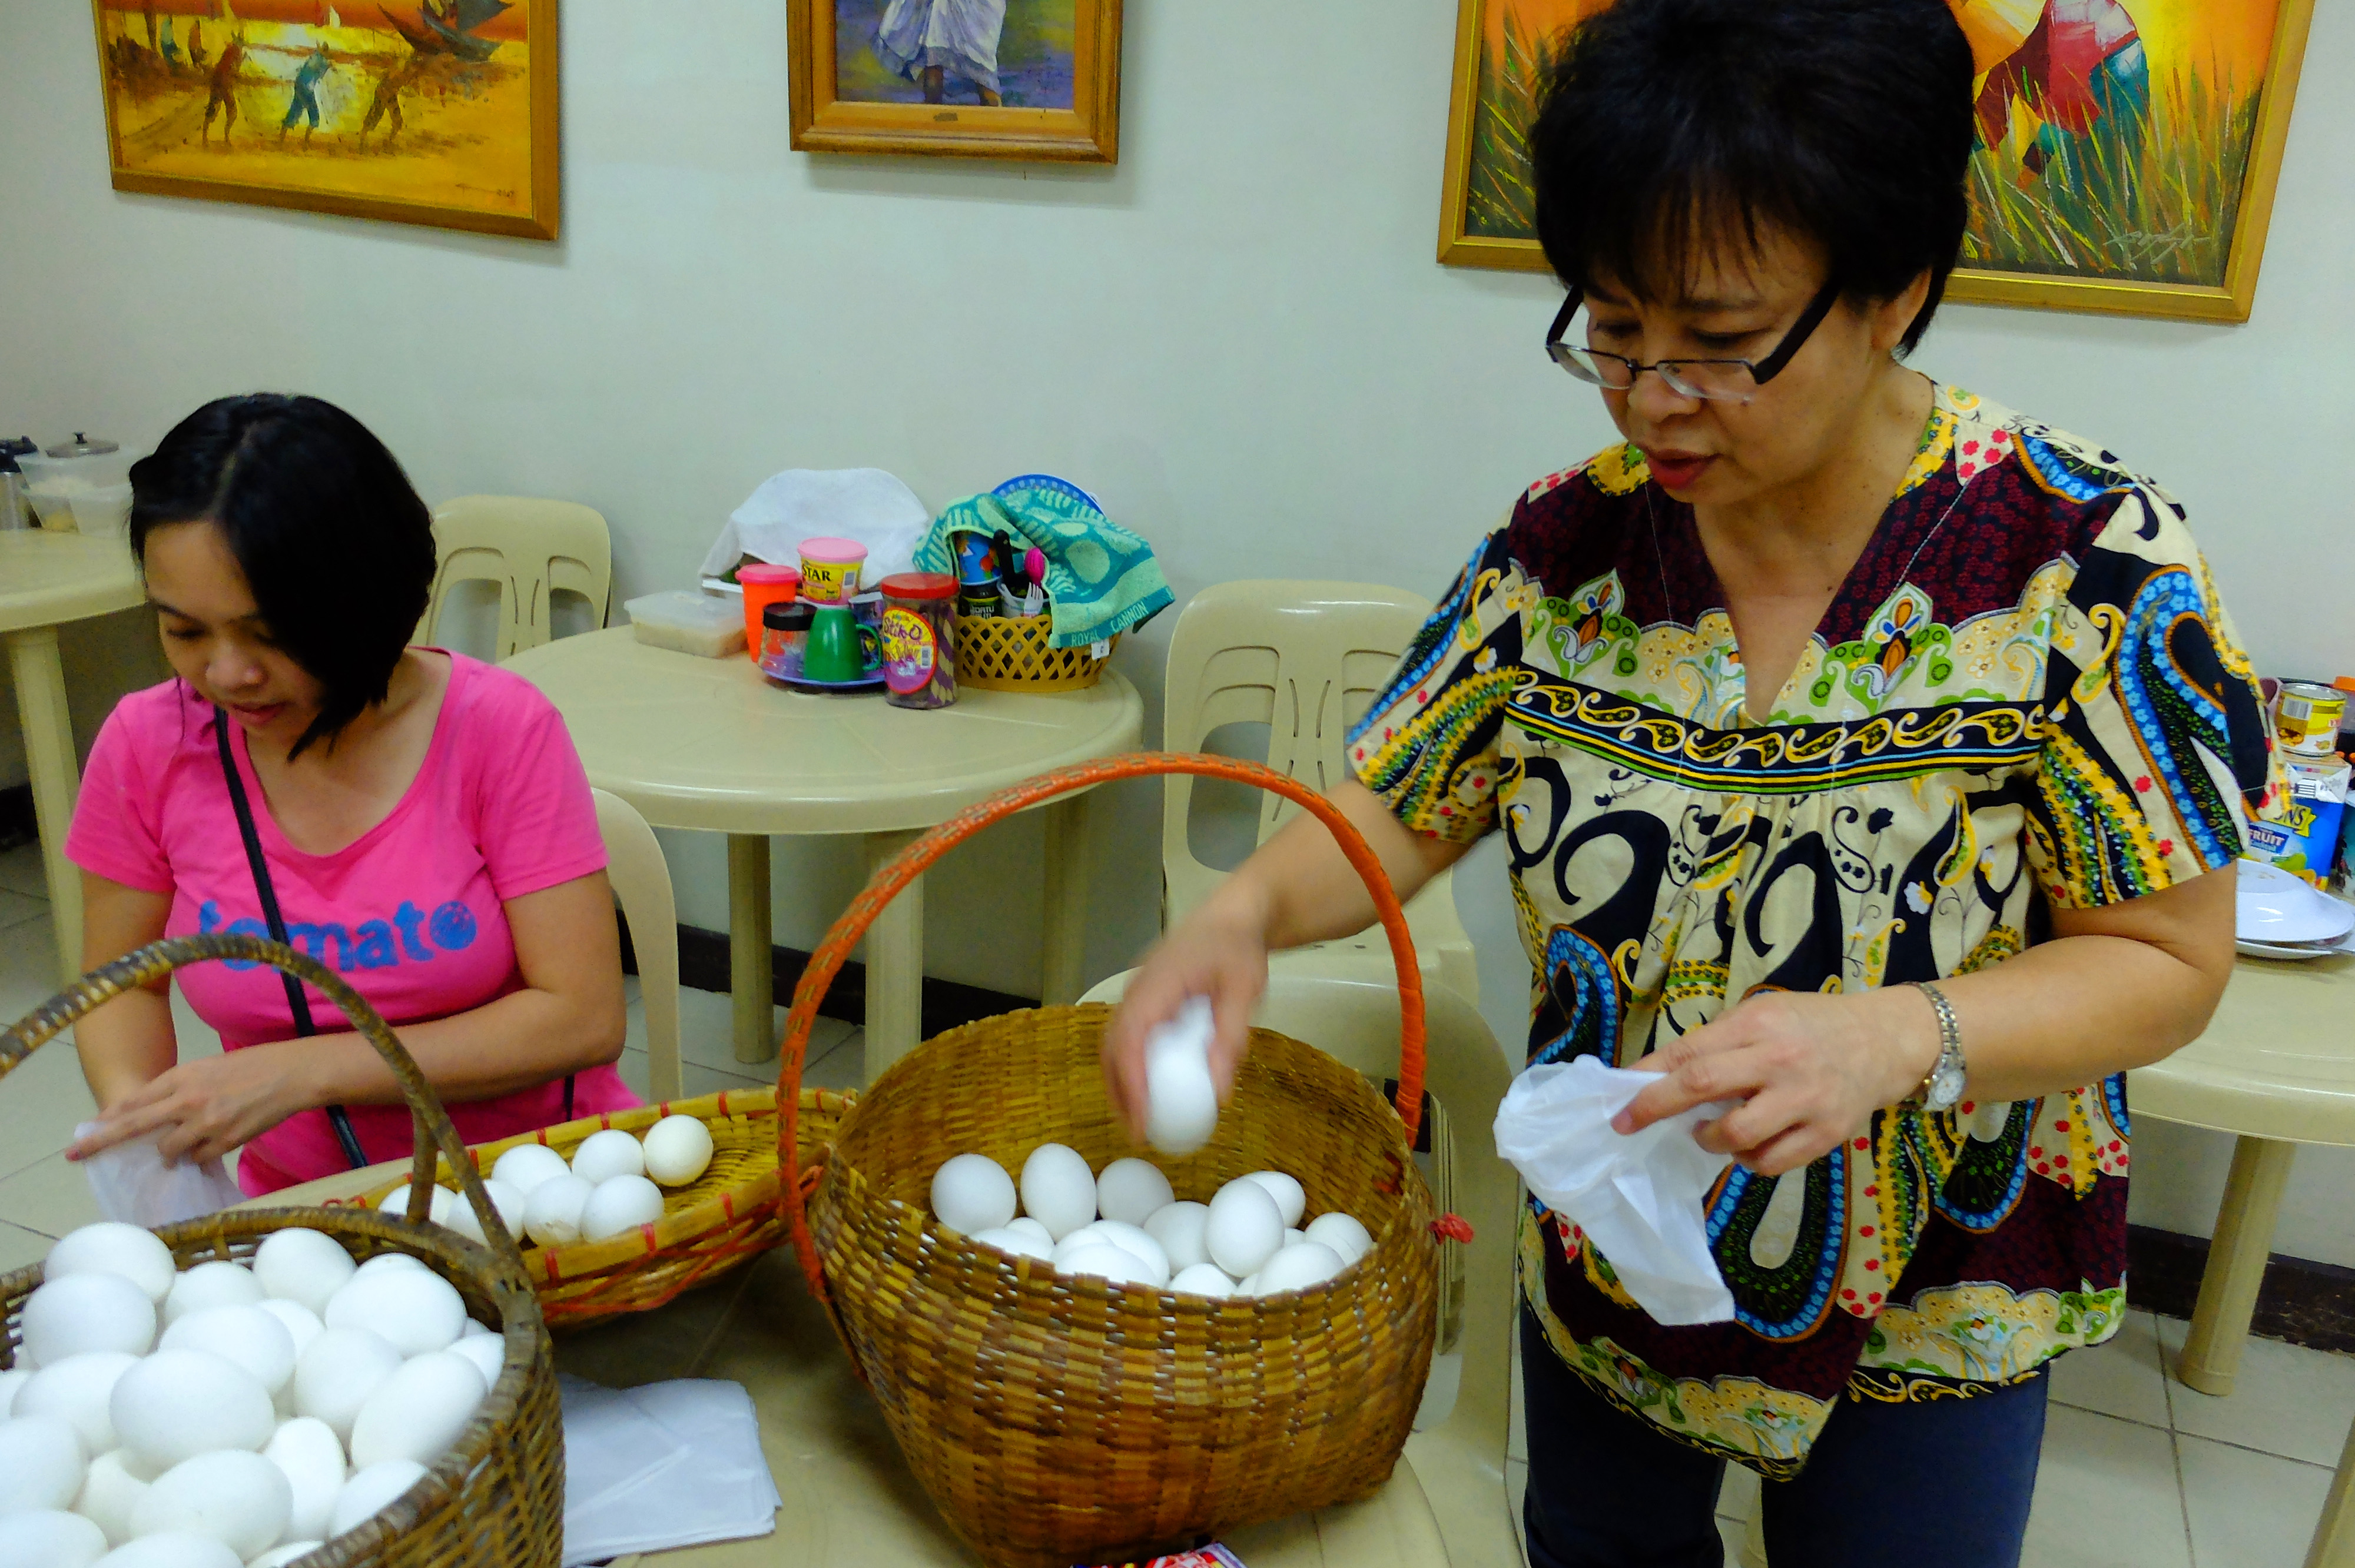 Becky and NCPAG Library staff Mayzel Marifosque sorting and packing eggs.